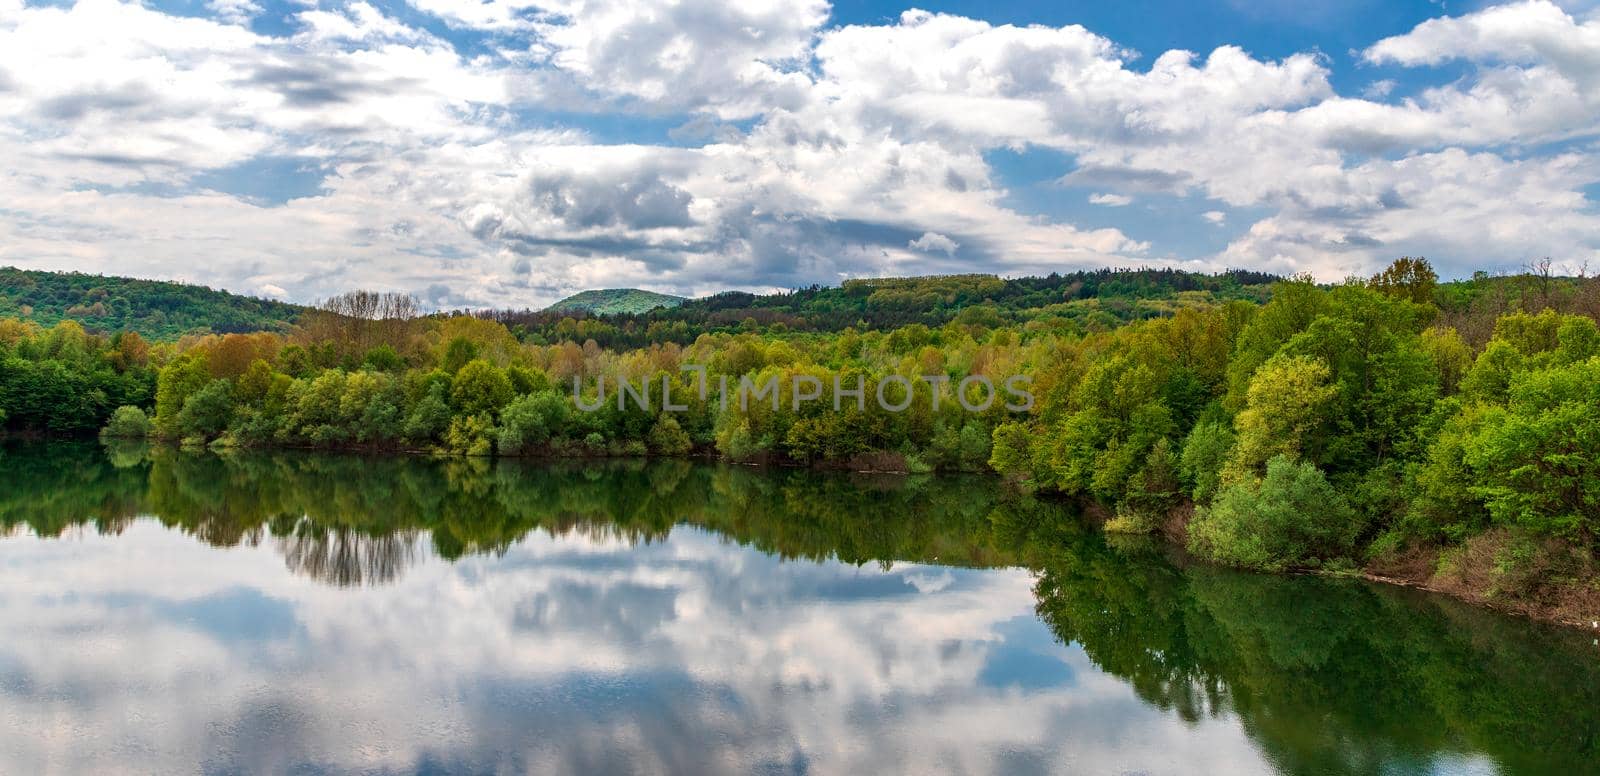 Landscape at the lake with calm water, trees reflection, and beautiful sky